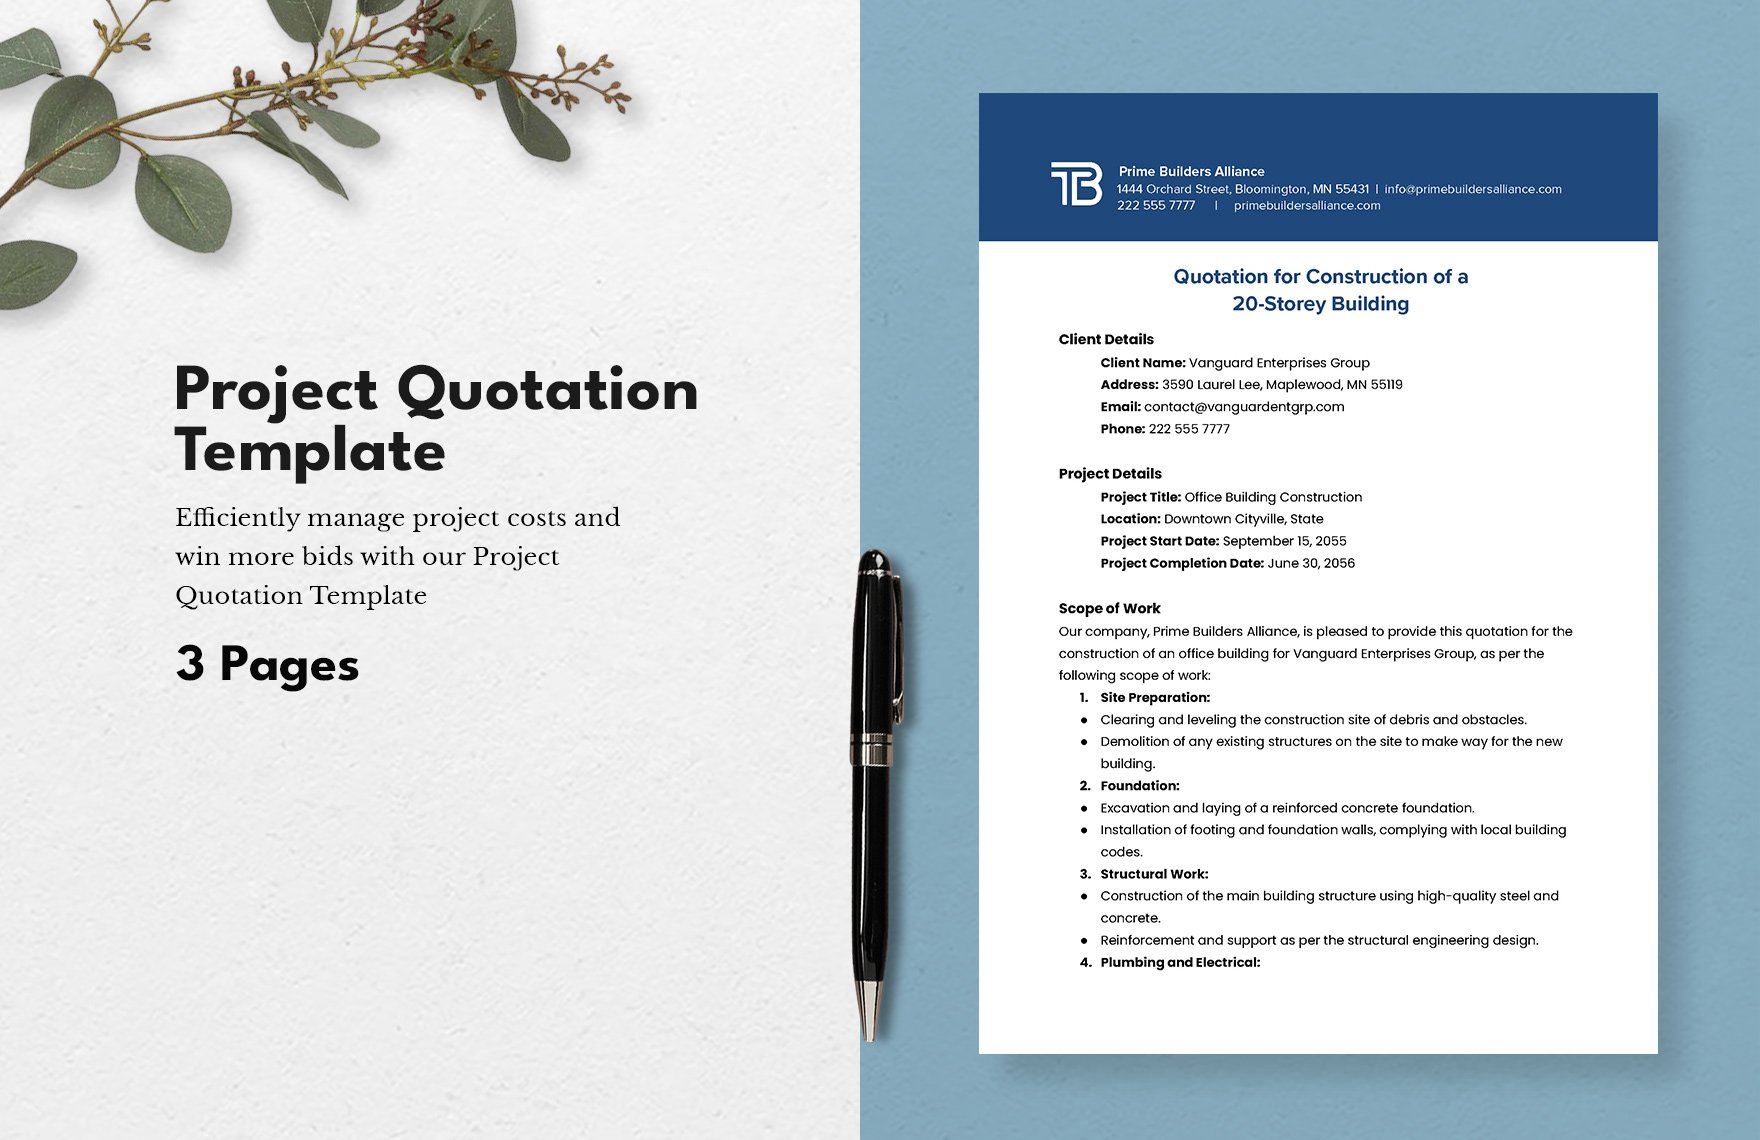 Project Quotation Template